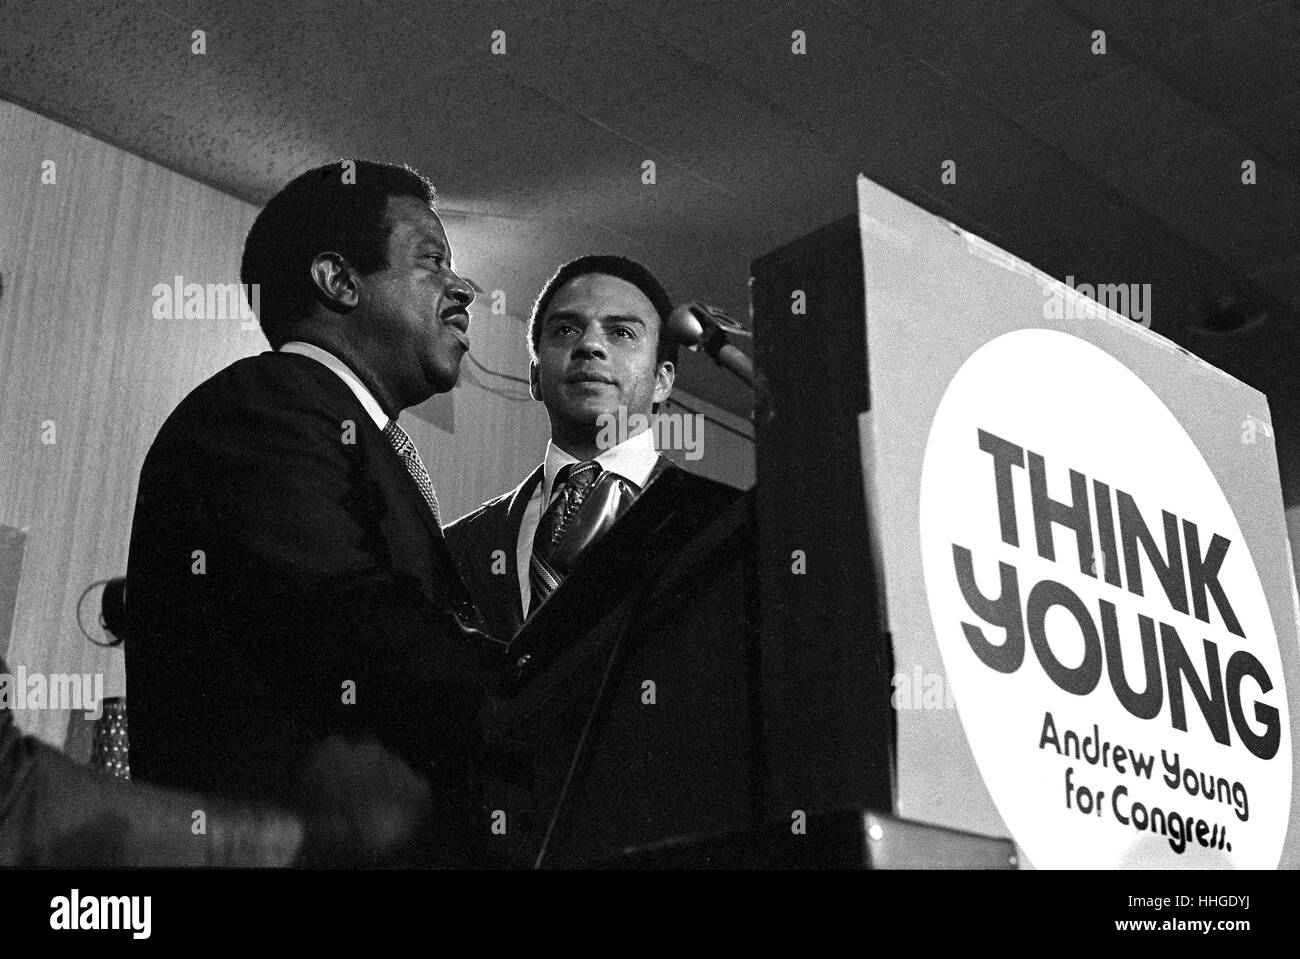 Andrew Young sheds a tear as he concedes defeat in his first run for the Georgia 5th District Congressional race on election night 1970. Young's longtime friend and fellow lieutenant to Martin Luther King, Jr. - Ralph David Abernathy stands at Young's side. Stock Photo